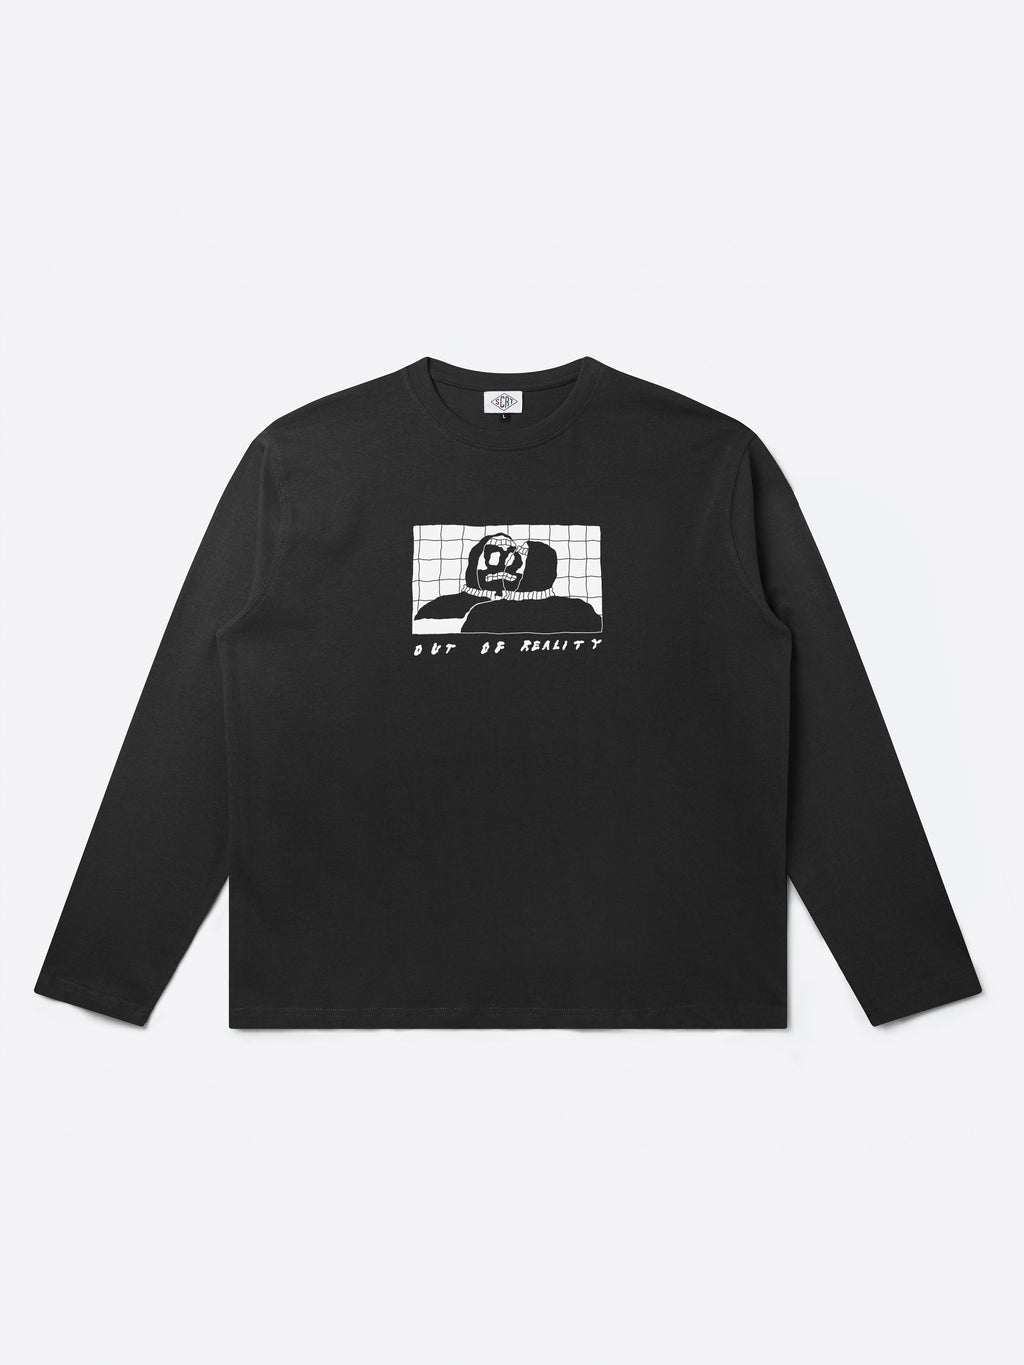 Out Of Reality T-Shirt - Black